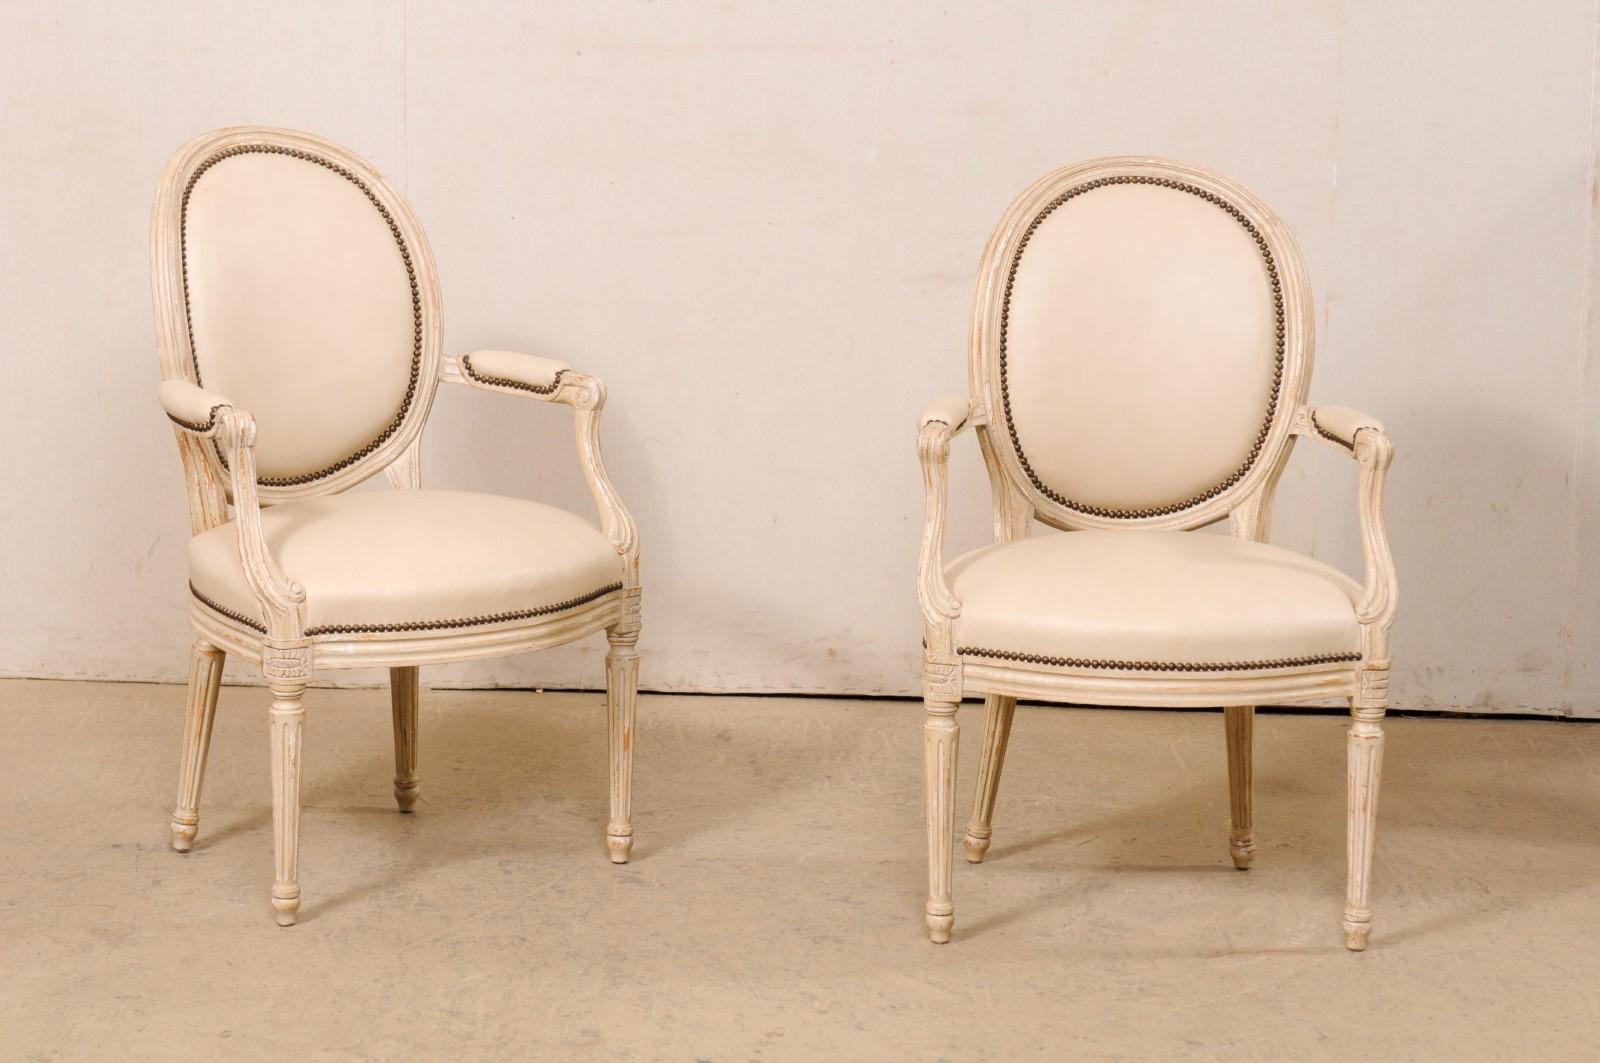 A French pair of carved/painted wood and upholstered armchairs. These vintage chairs from France each feature oval-shaped upholstered backs within a nicely molded wood frame. Manchette padded arm rests with carved curled knuckles. The skirt is nice